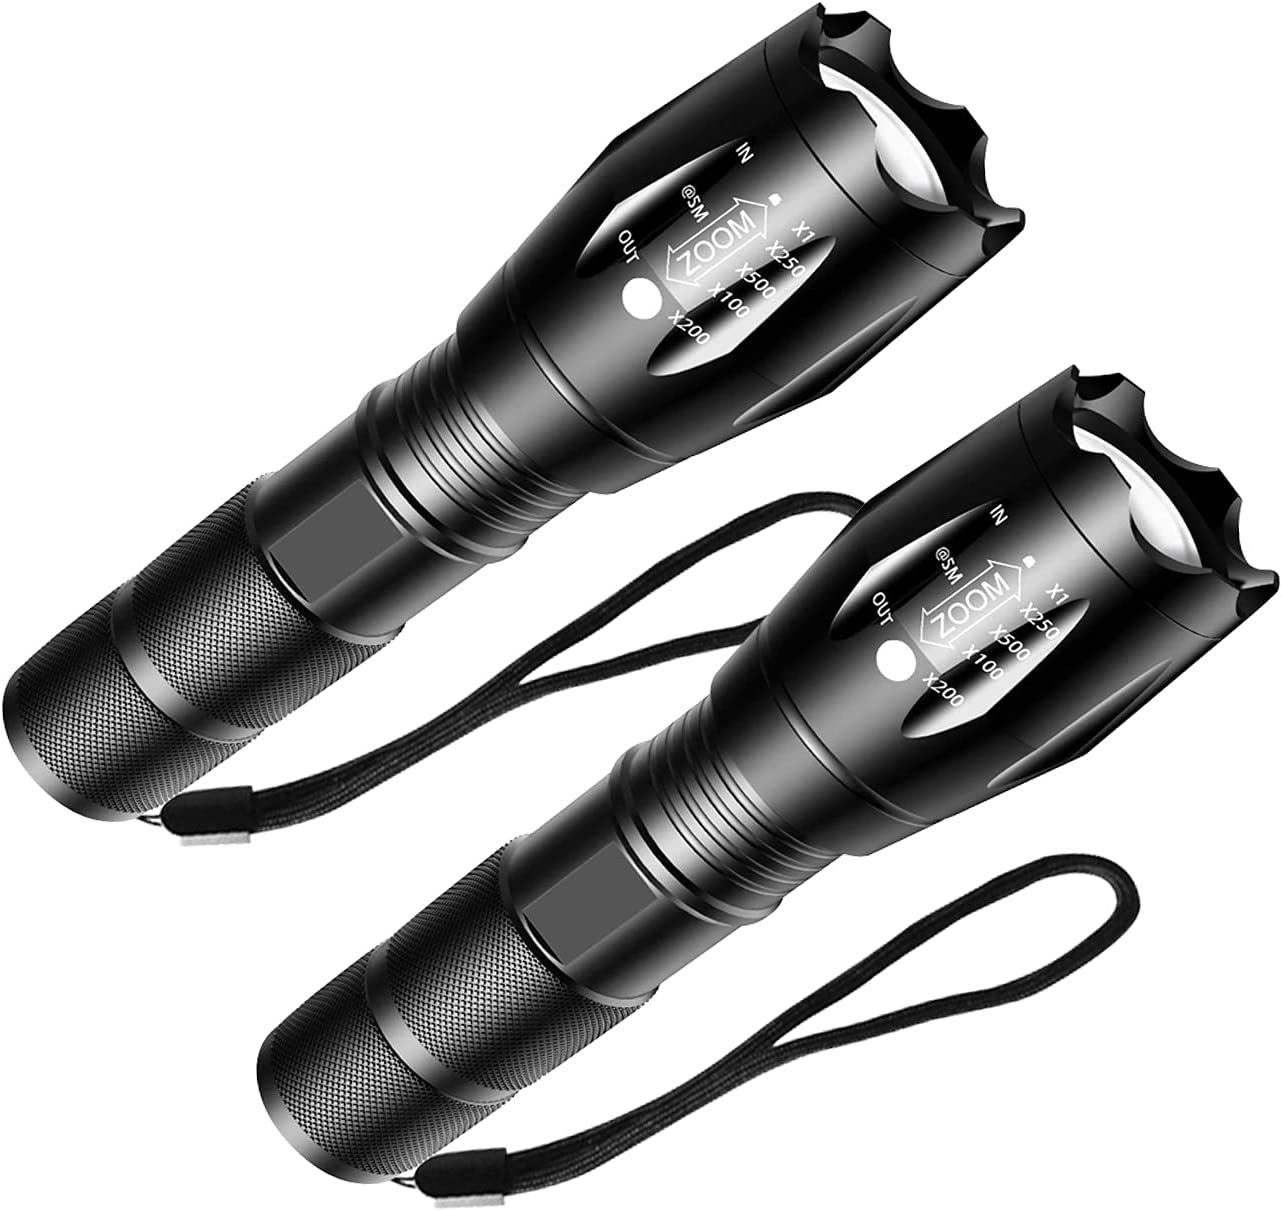 COSITA LED Tactical Flashlight, Super Bright Flashlights with 5 Modes, Zoomable, IP65 Water Resistant Handheld Light Powerful Camping Outdoor Emergency Everyday Flashlights (2 Pack)